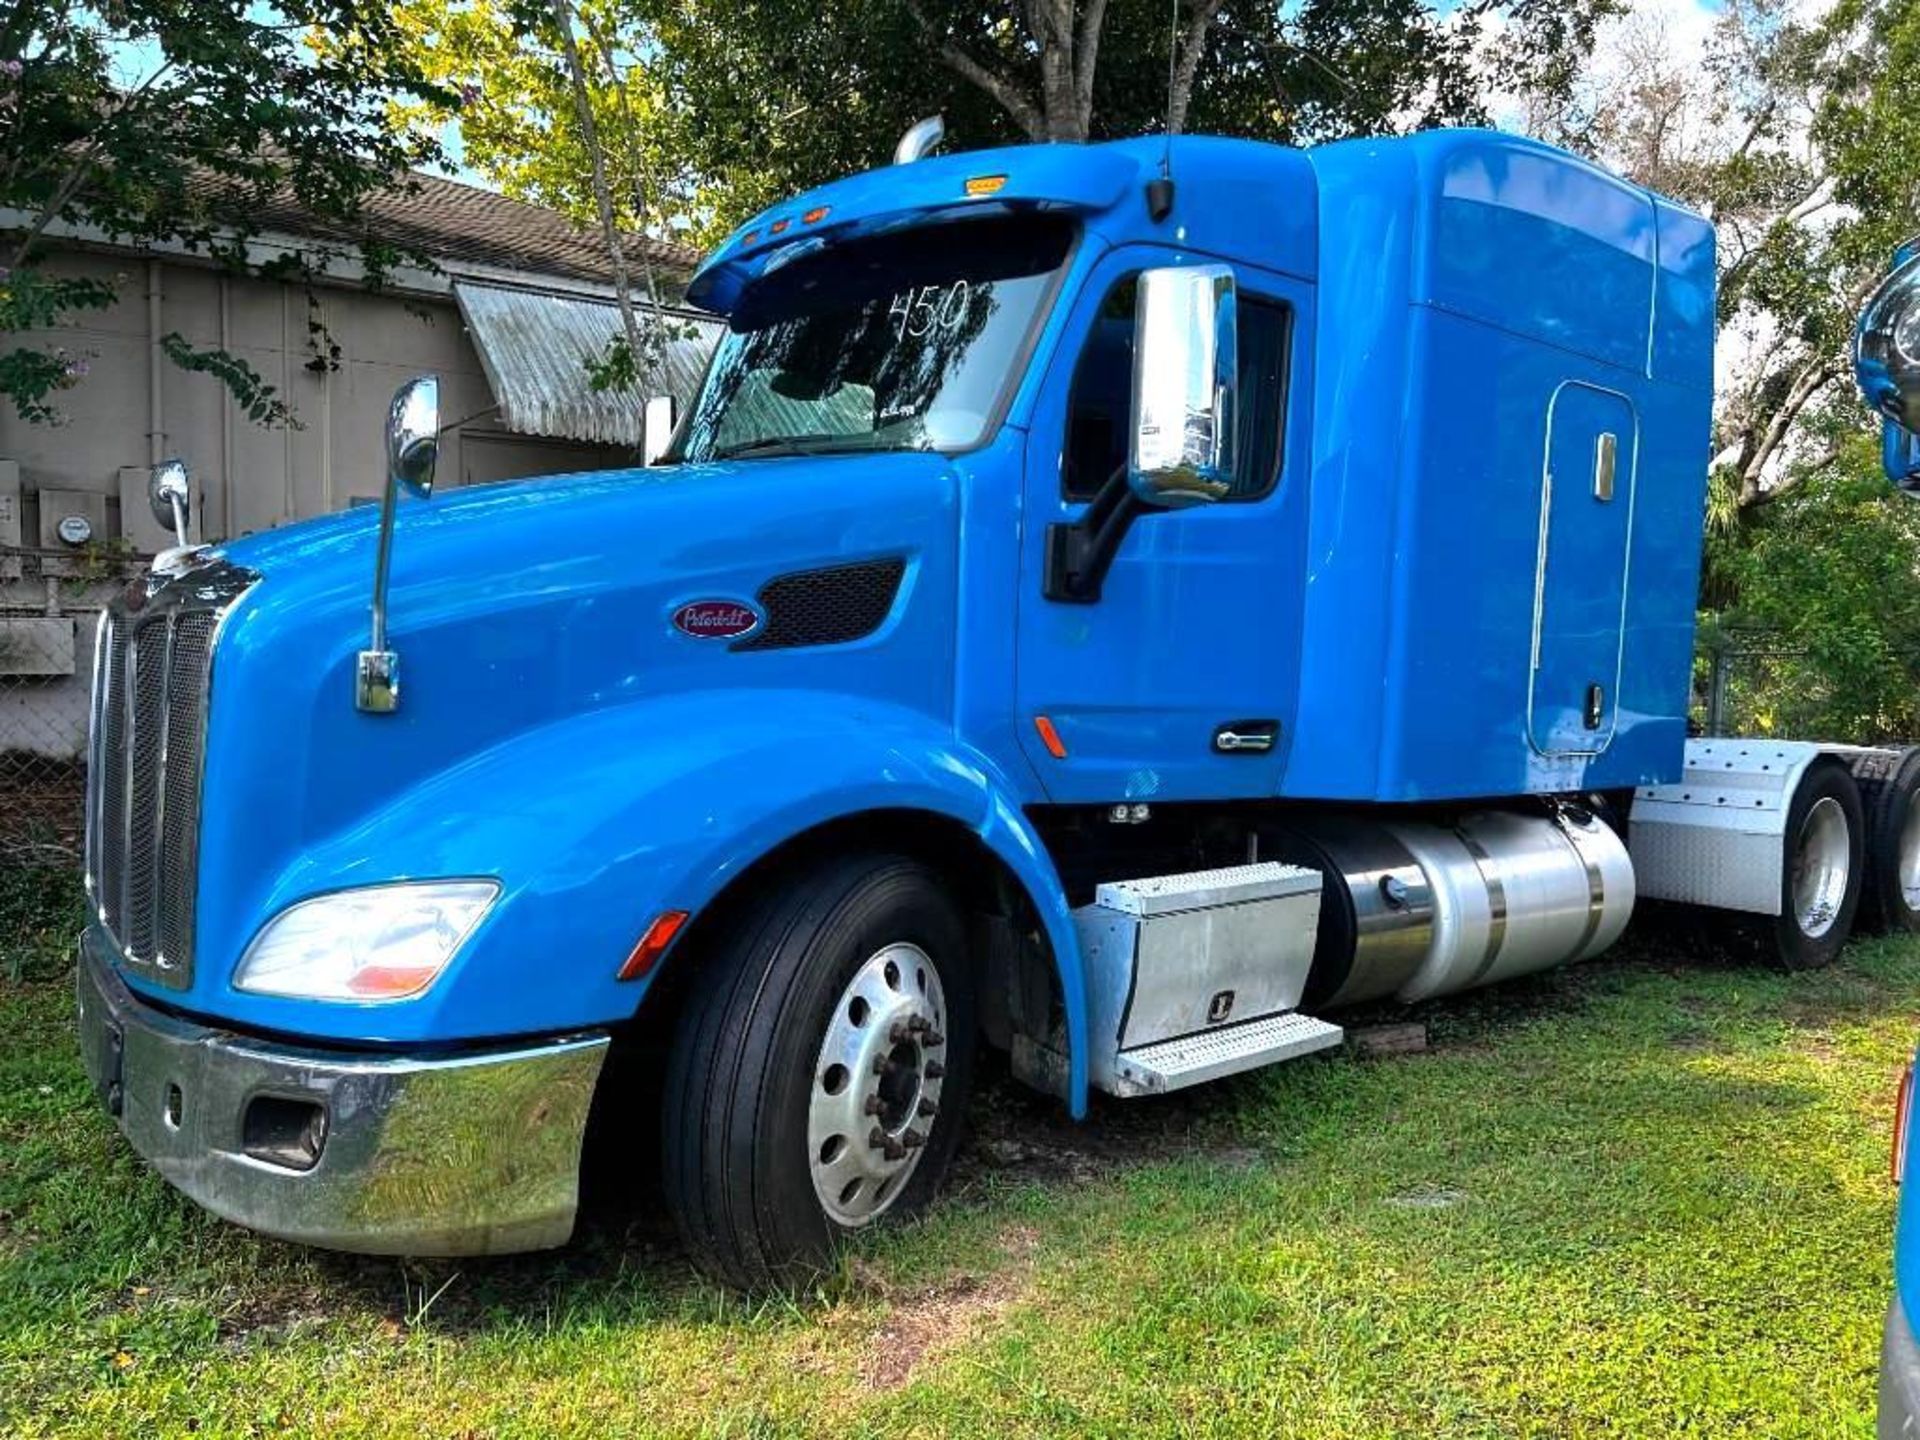 2014 PETERBILT 579 SEMI TRUCK W/SLEEPER CAB, PACCAR DIESEL ENGINE, 455 HP, AUTOMATIC TRANSMISSION, - Image 2 of 31